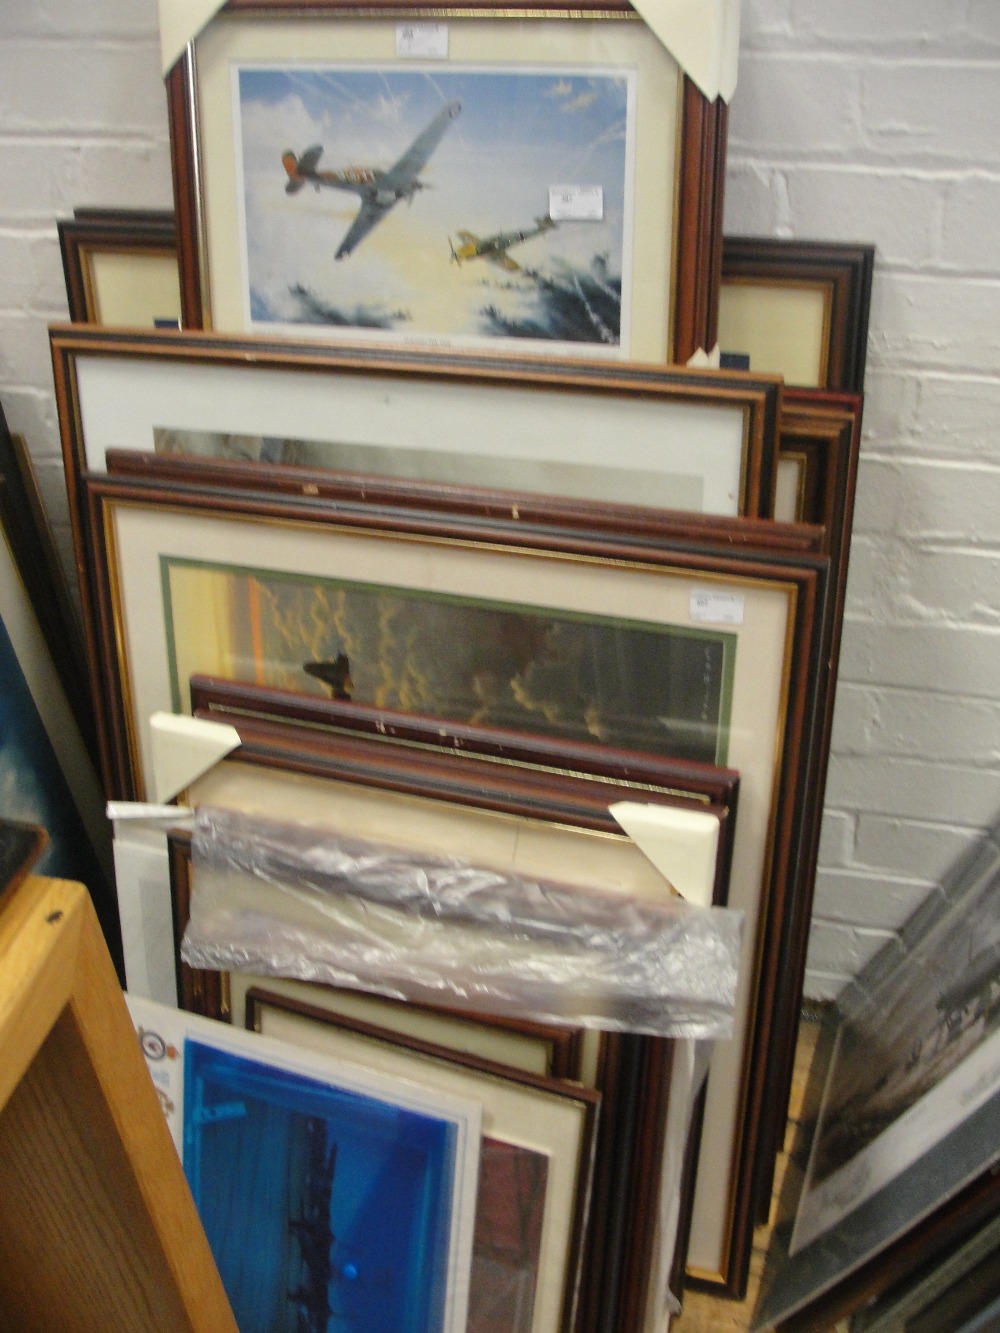 A quantity of limited edition military war plane prints